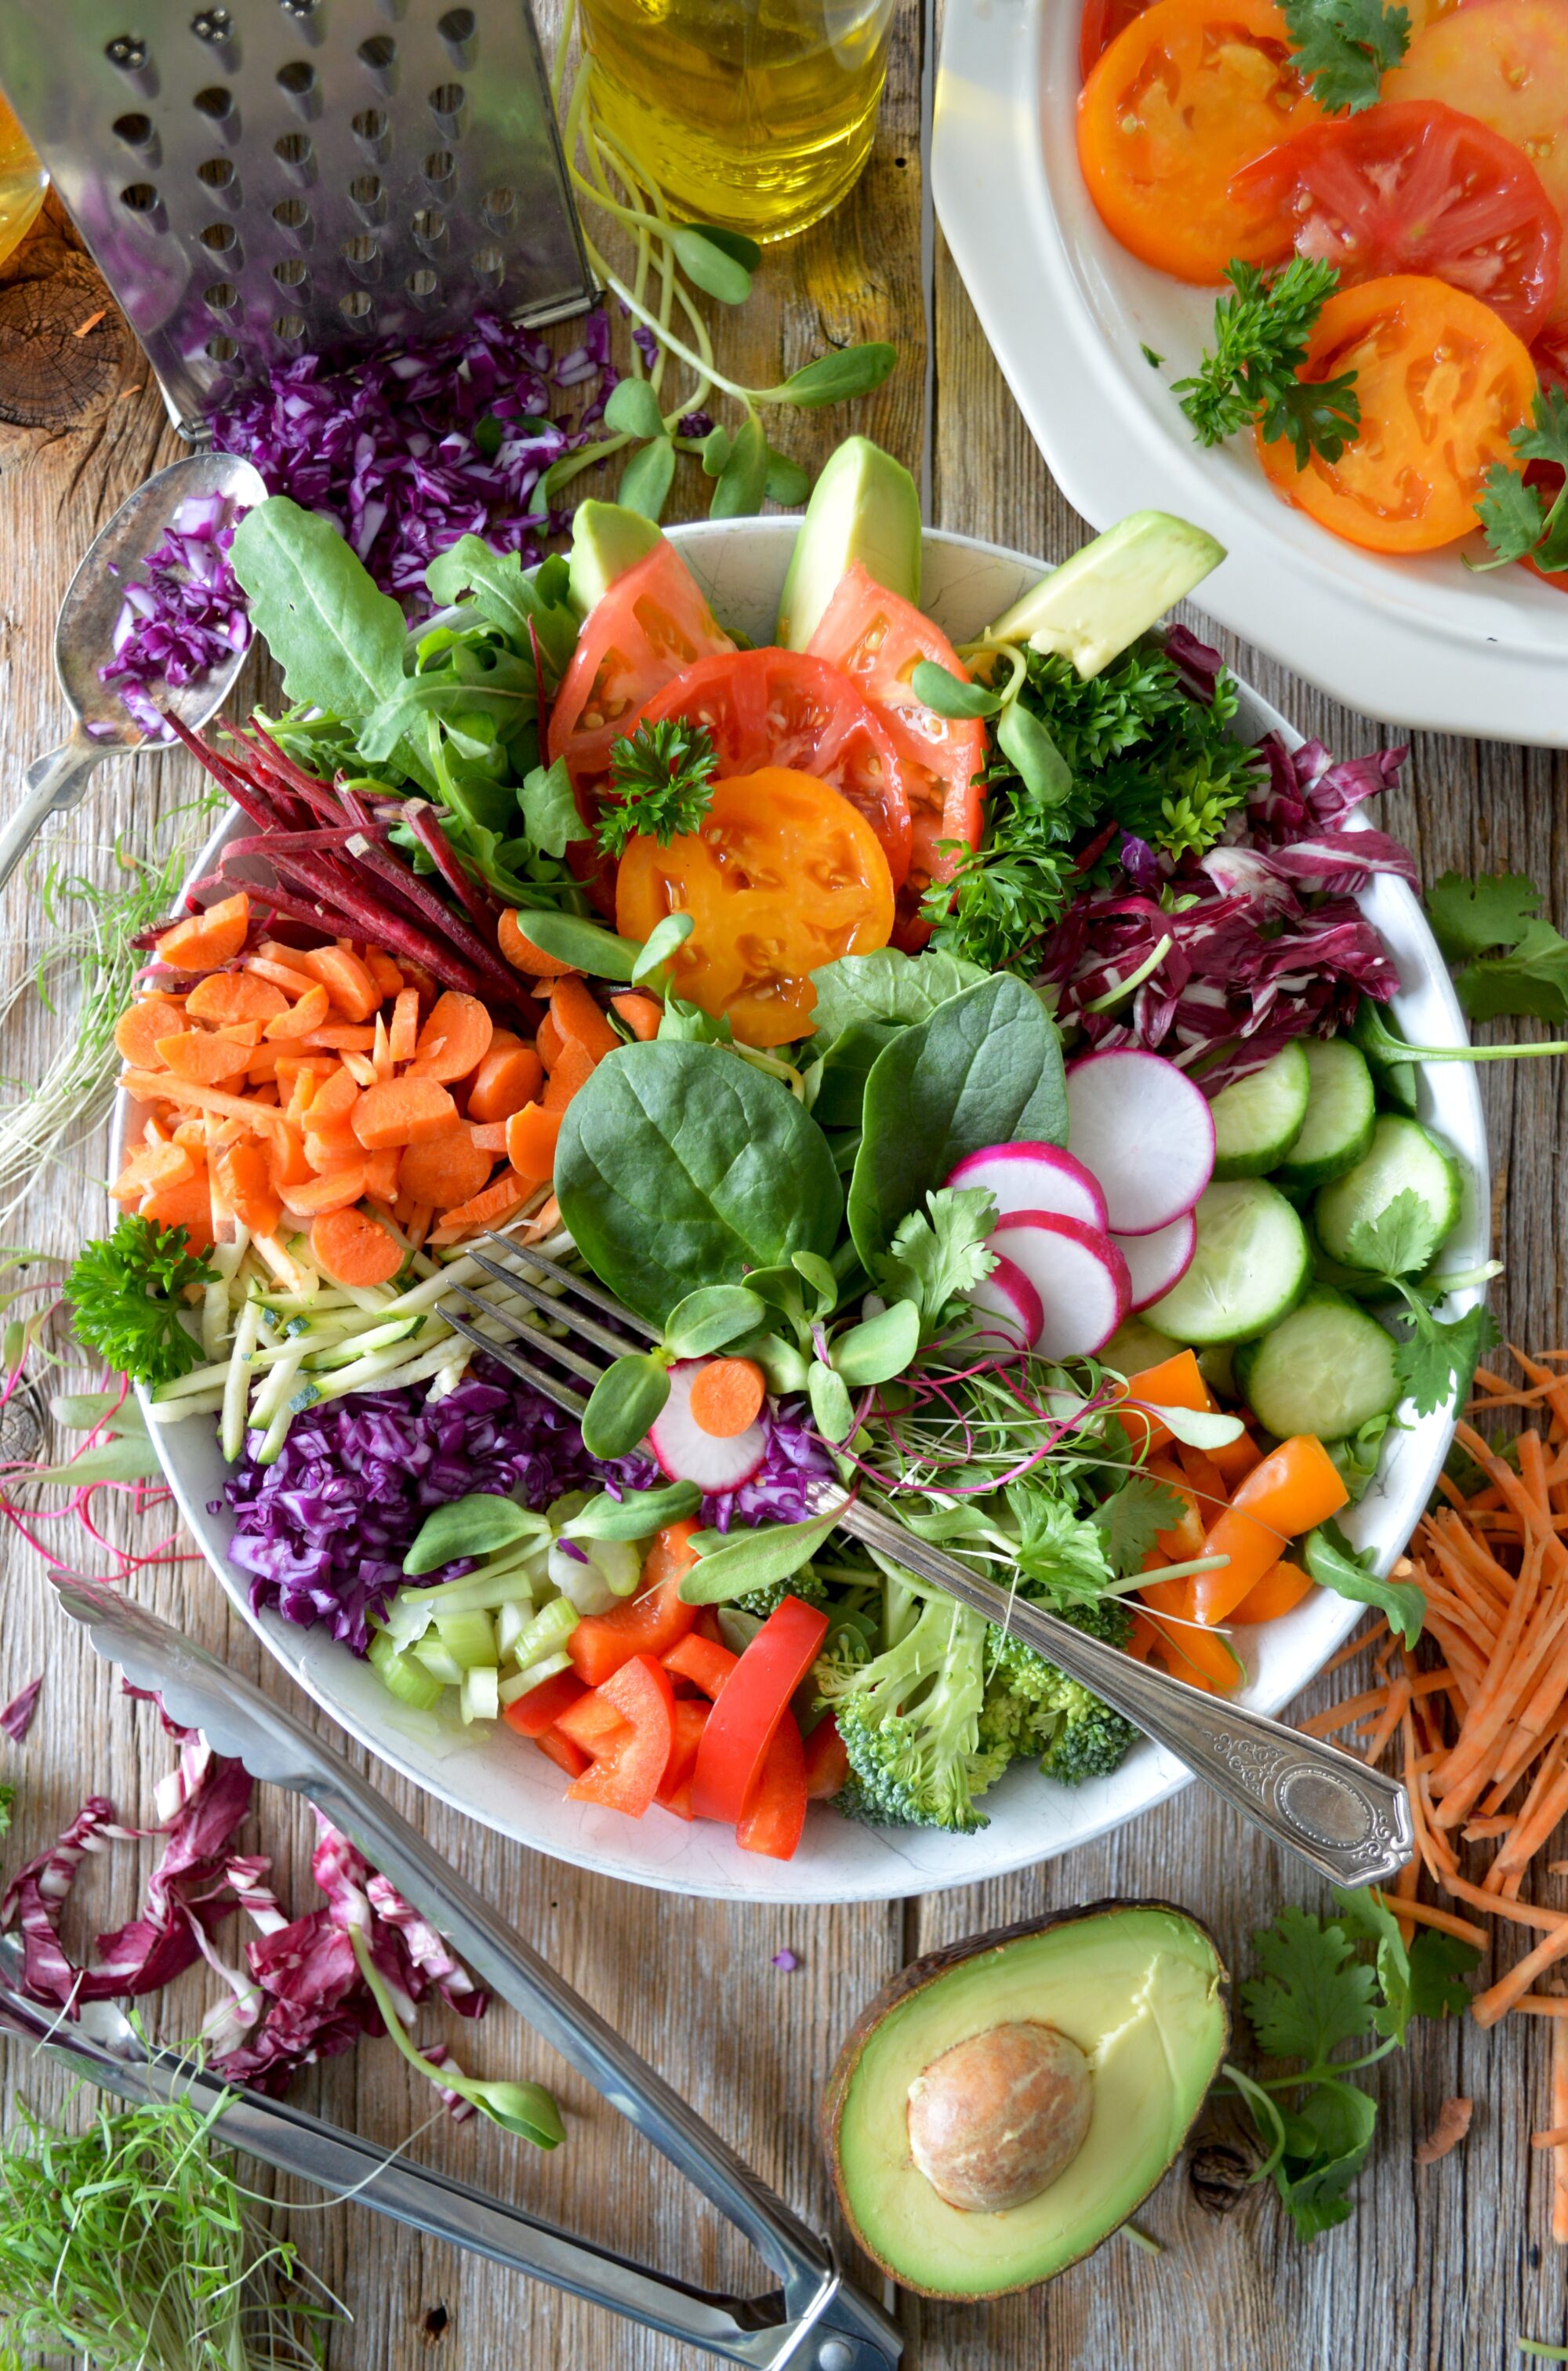 A colorful salad bowl viewed from above, with radishes, broccoli, peppers, cucumbers, sprouts, and many more vegetables.